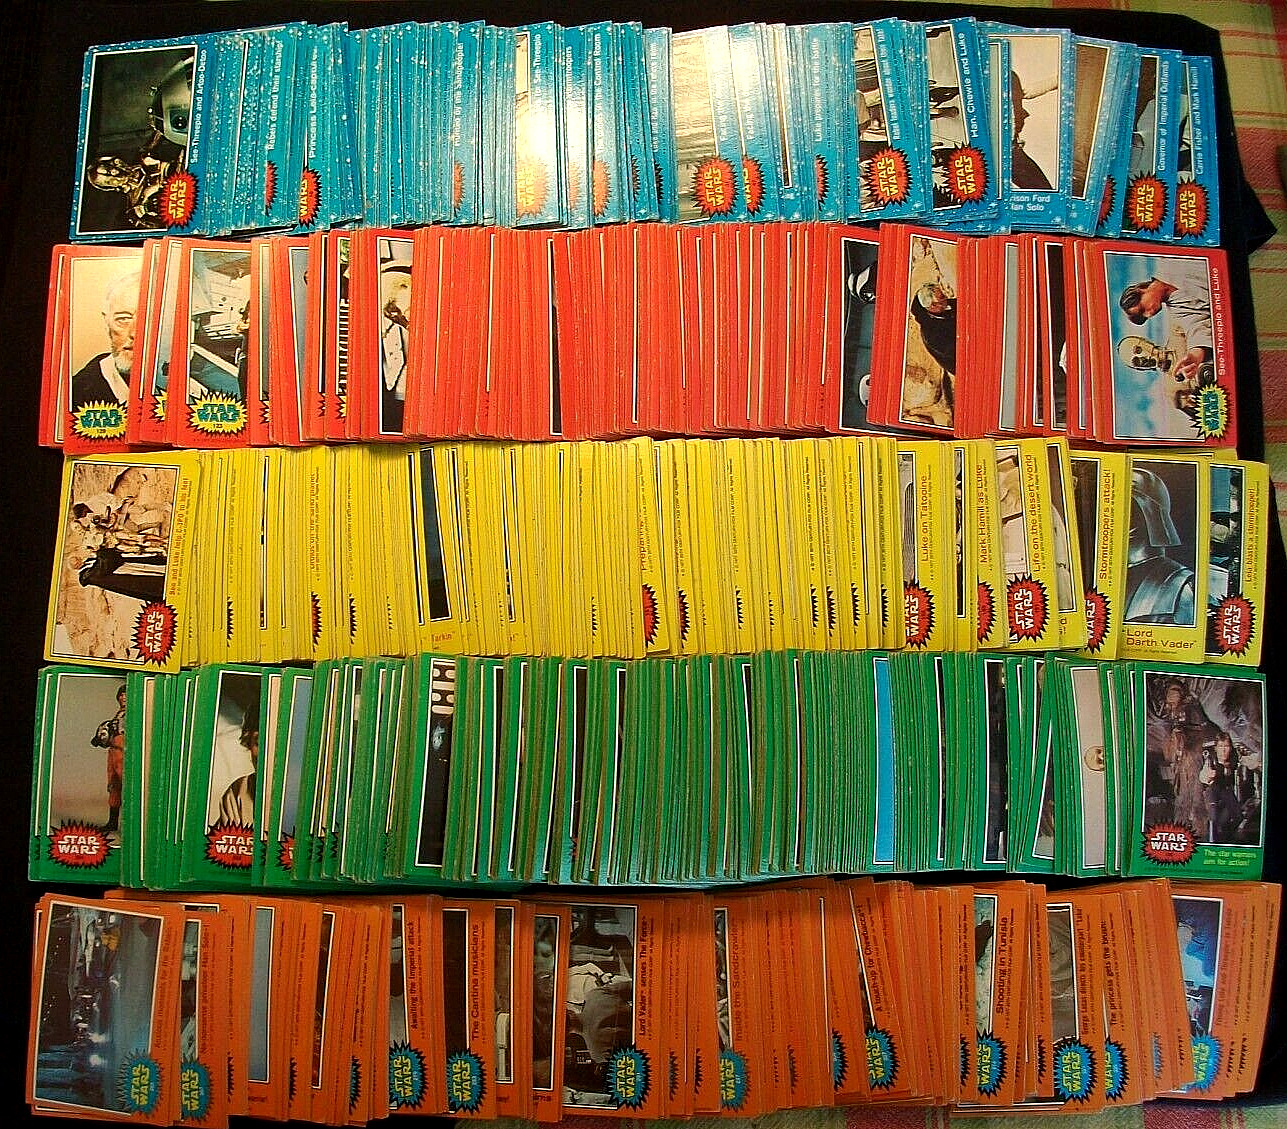 1977 Topps STAR WARS cards QUANTITY U-PICK READ DESCRIPTION FIRST BEFORE BUYING